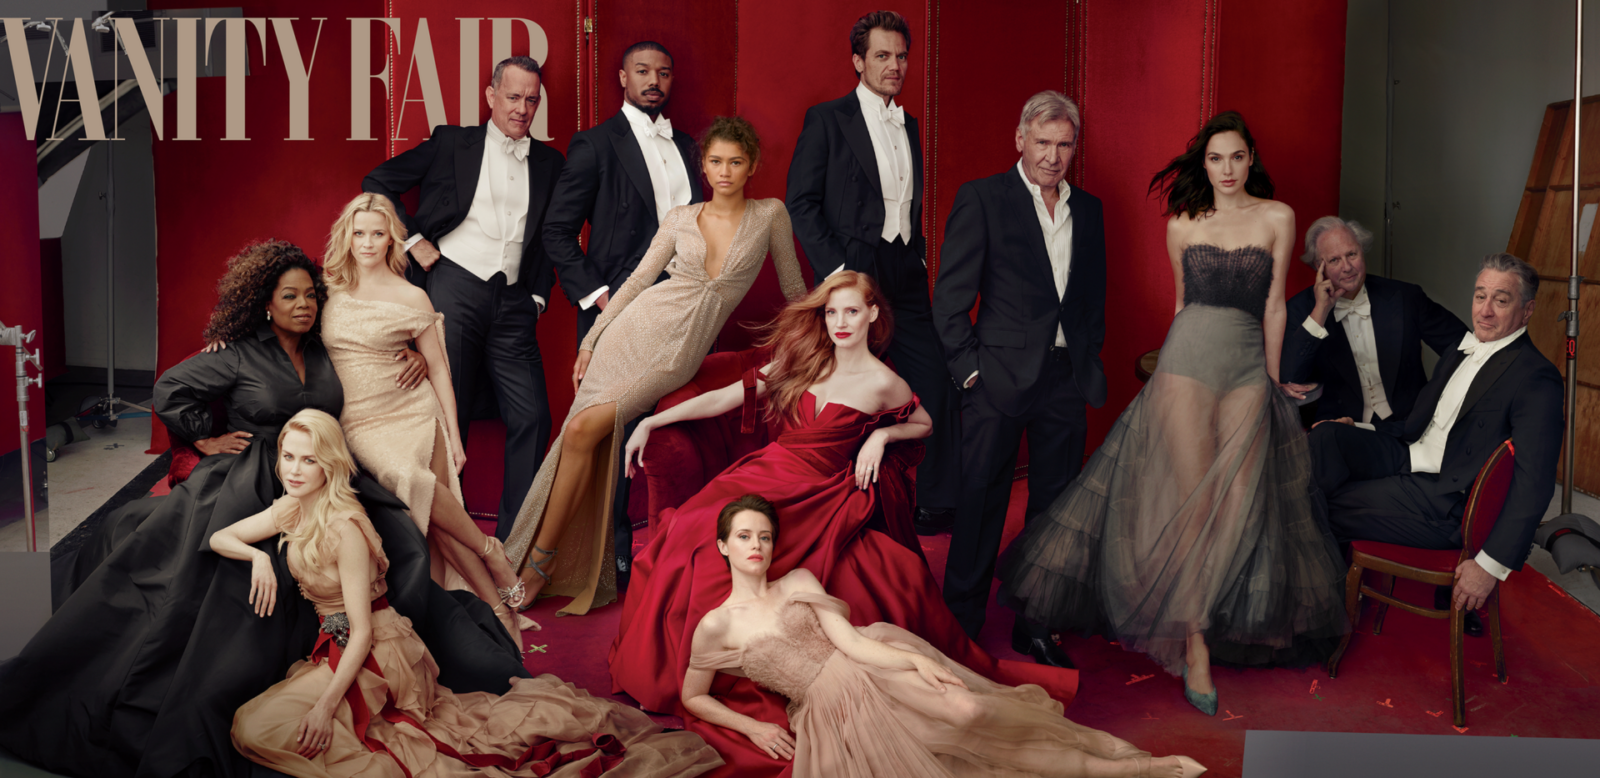 Vanity Fair Cover Newport Living and Lifestyles Annual Influencer Awards inspiration #NLLAiA